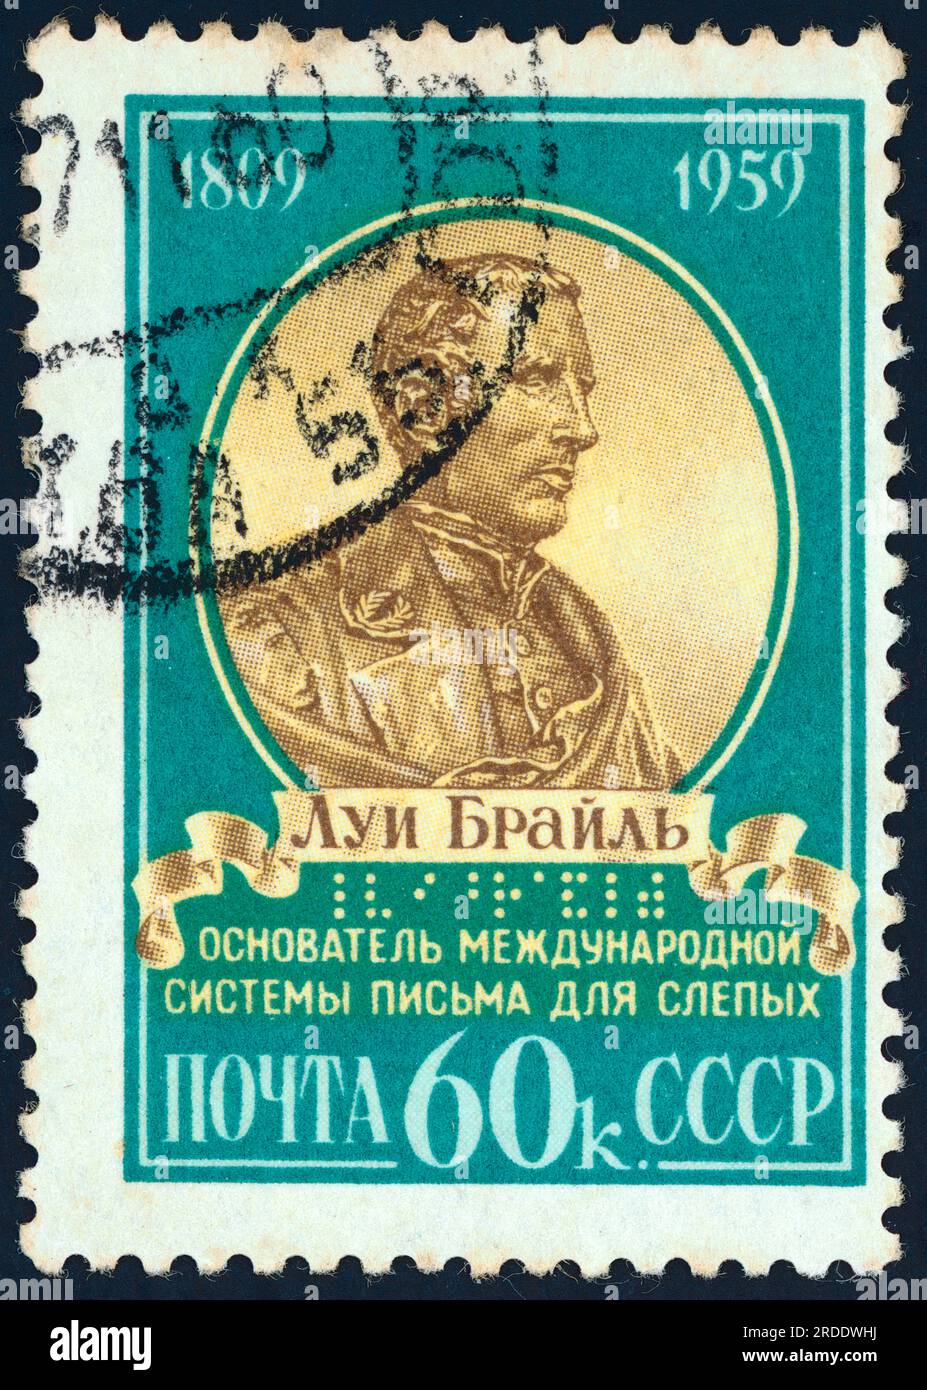 Louis Braille (1809 – 1852). Postage stamp issued in the USSR in 1959 on the 100th anniversary of Braille's birth. Louis Braille was a French educator and the inventor of a reading and writing system, named braille after him, intended for use by visually impaired people. His system is used worldwide and remains virtually unchanged to this day. Stock Photo